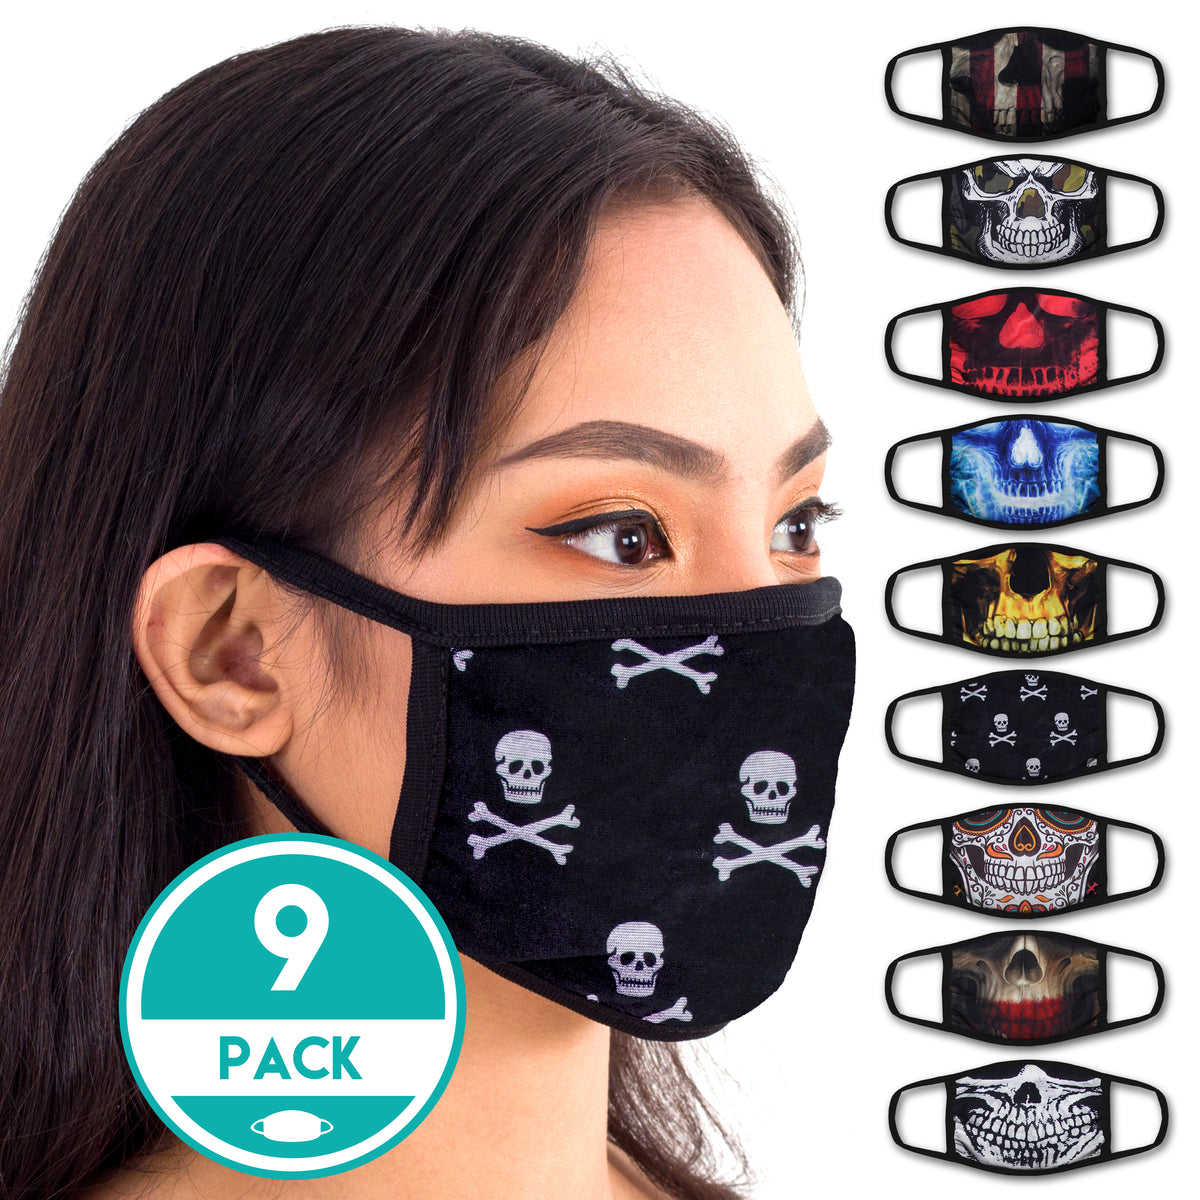 Face Mouth Mask - Cotton Face Covering (9 Pack - Skull)